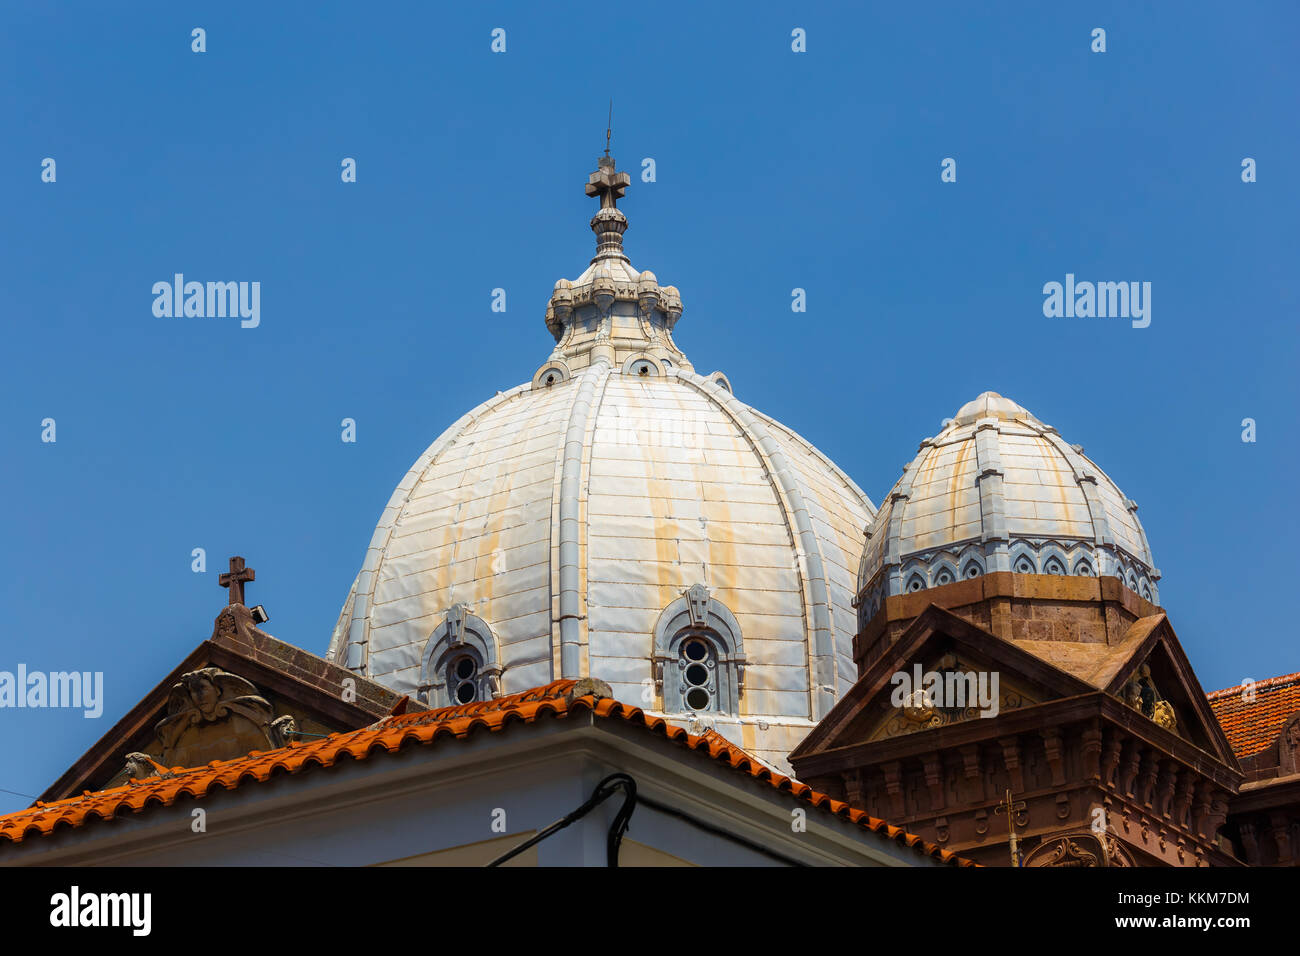 St Therapontas cathedral temple architectural details in the morning, against a clear sky in Mytilene, Lesvos island, Greece Stock Photo